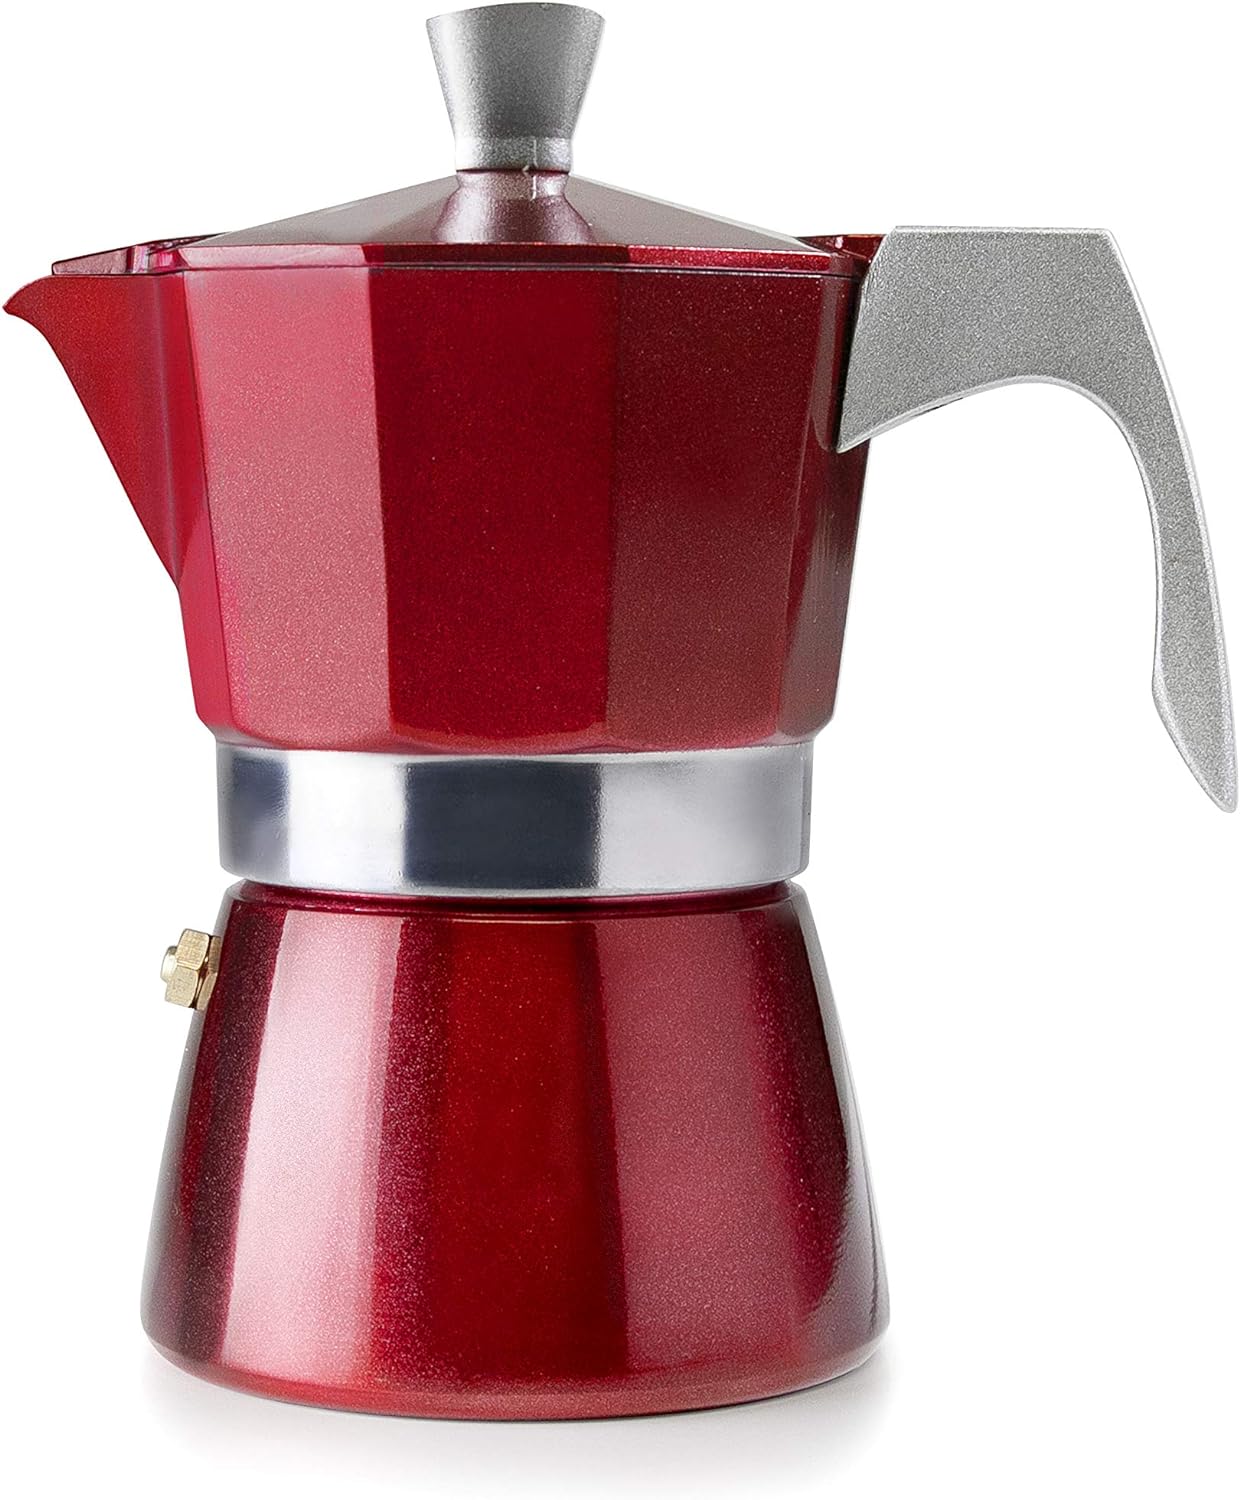 Ibili - Express coffee cooker EVVA RED, 6 cups, 300 ml, aluminum die -casting, suitable for induction foci